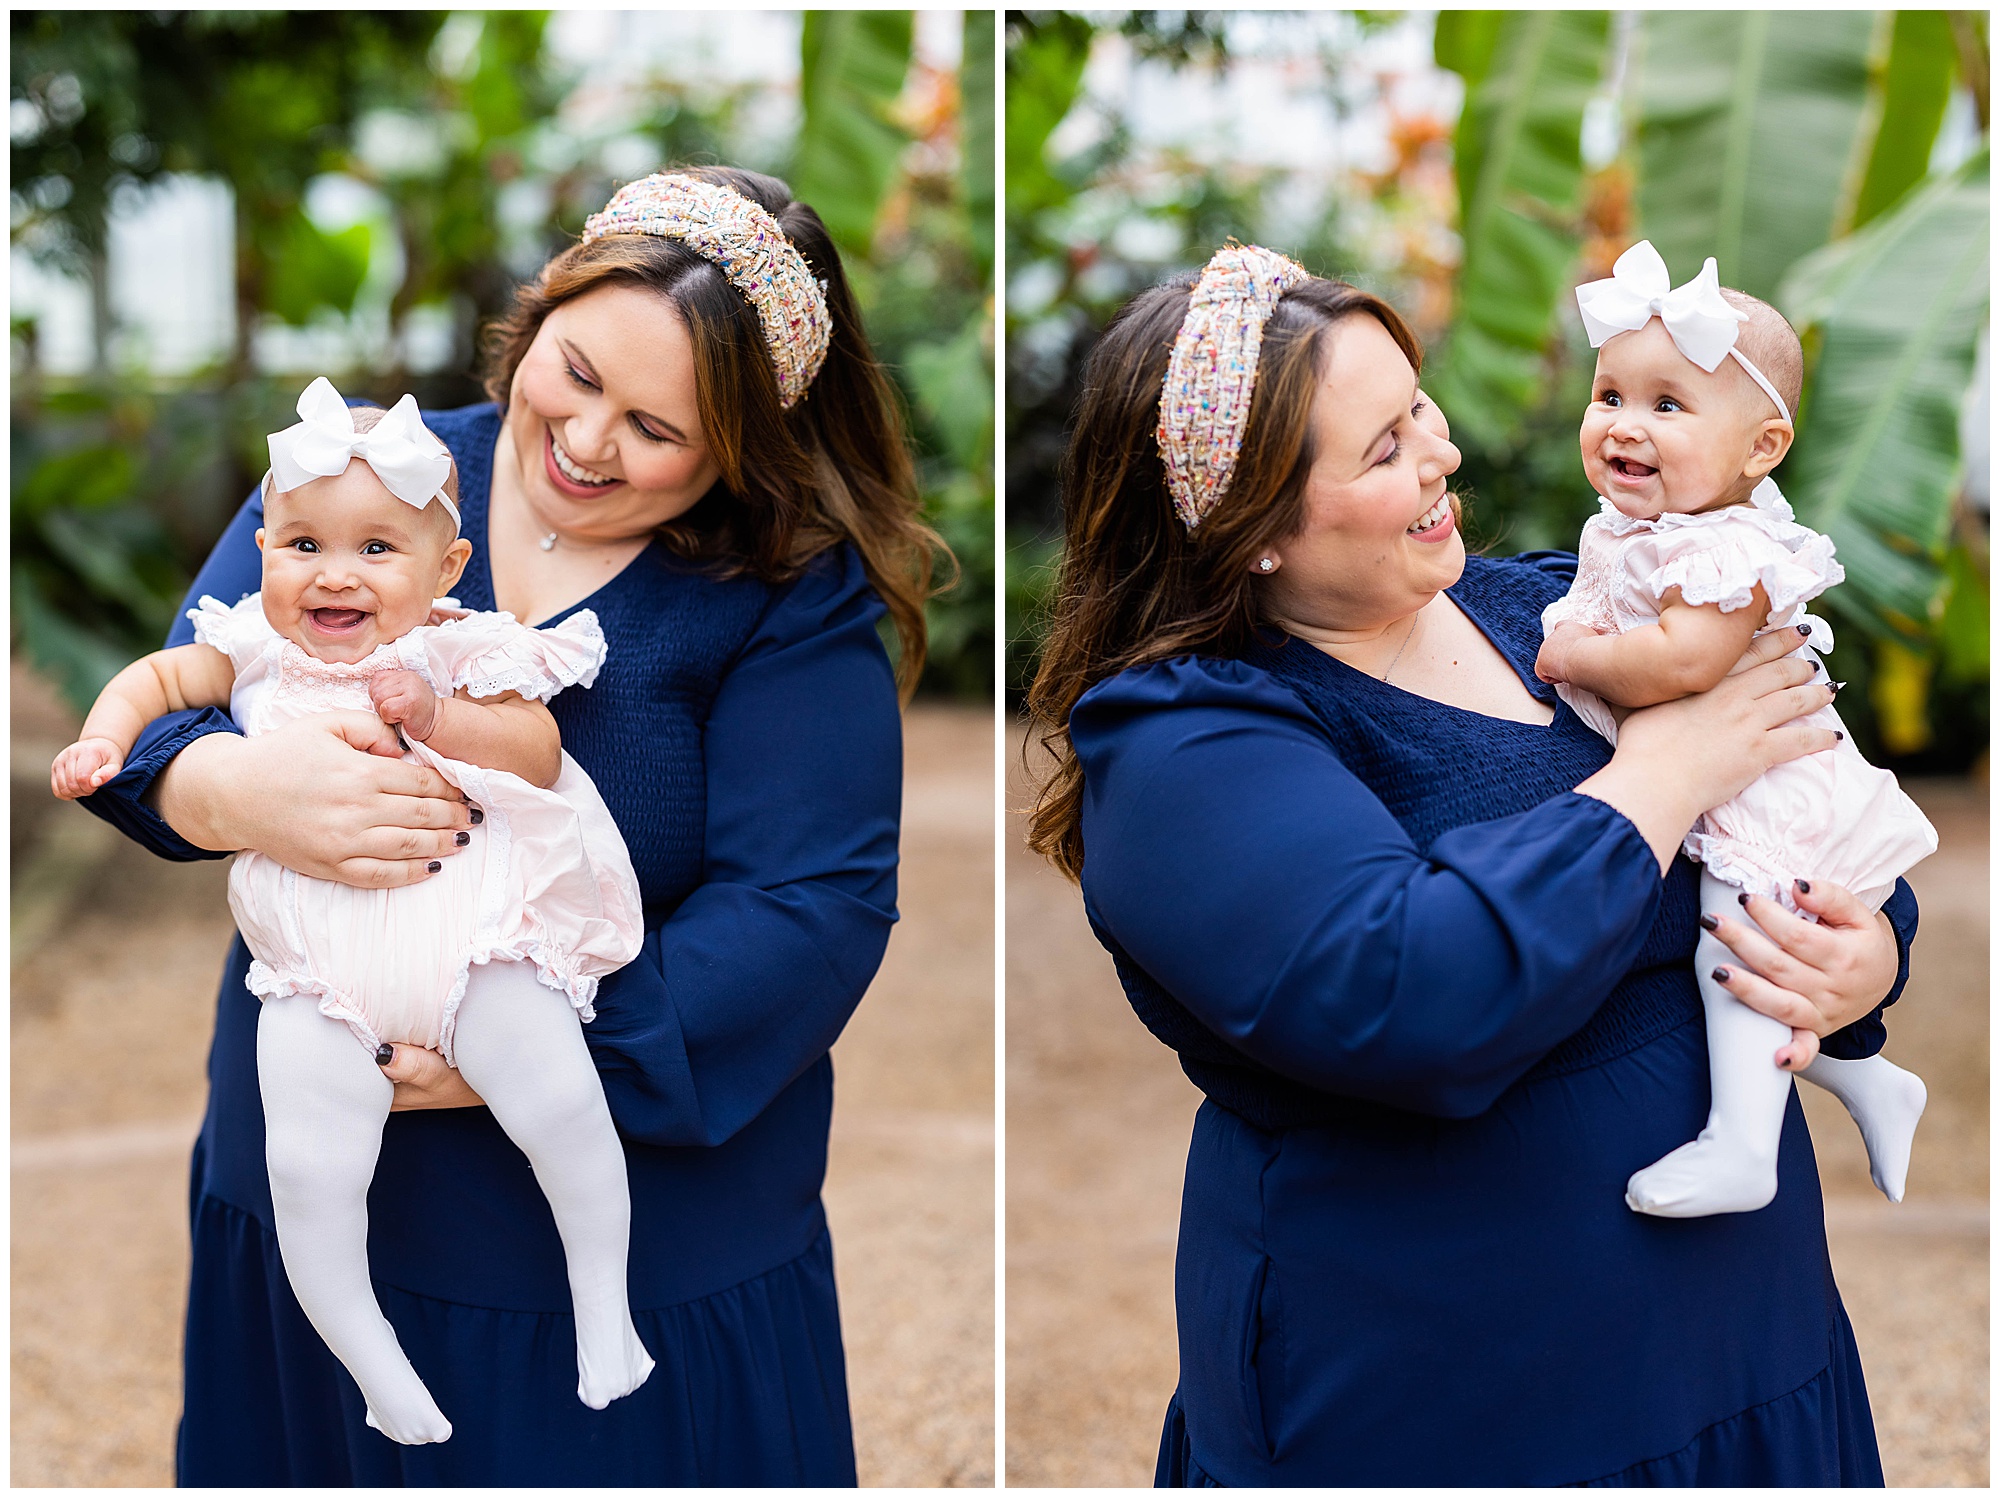 Eleanor Stenner Photography - a Birmingham, AL wedding photographer - photographs Cathryn & Quincy in her Valentine's Day Mini Sessions